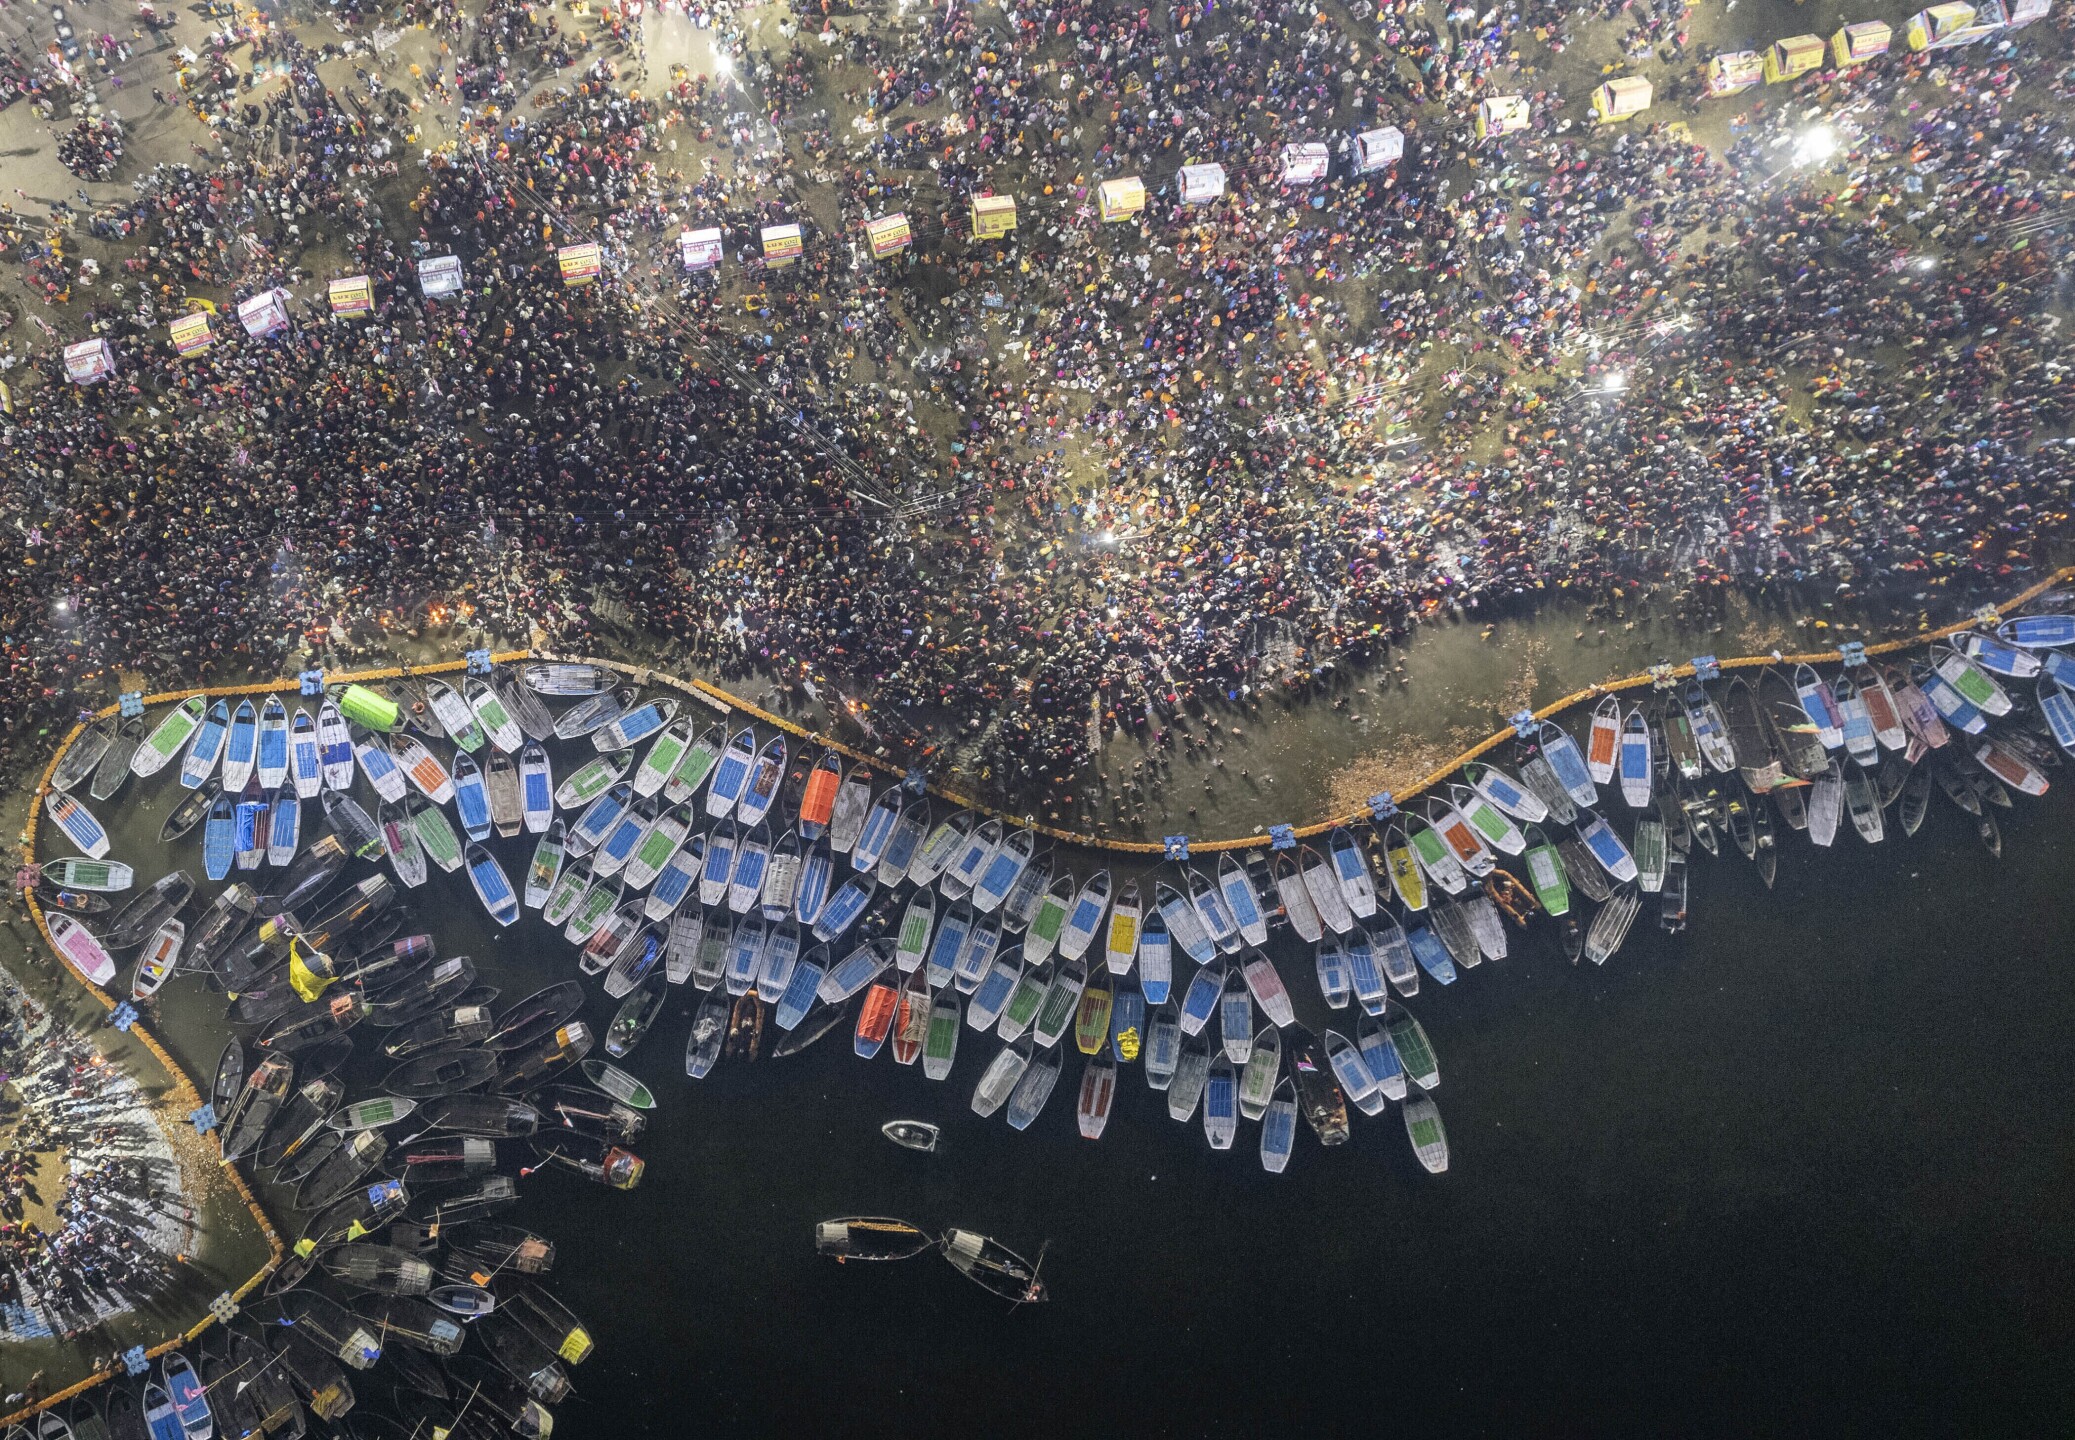 Hindu devotees crowd the Sangam, the confluence of the rivers Ganges, Yamuna and the mythical Saraswati, to take a holy dip on Mauni Amavsya or the new moon day, the most auspicious day during the annual month-long Hindu religious fair "Magh Mela" in Prayagraj, India, on Jan. 21, 2023. (AP Photo/Satya Prakash)